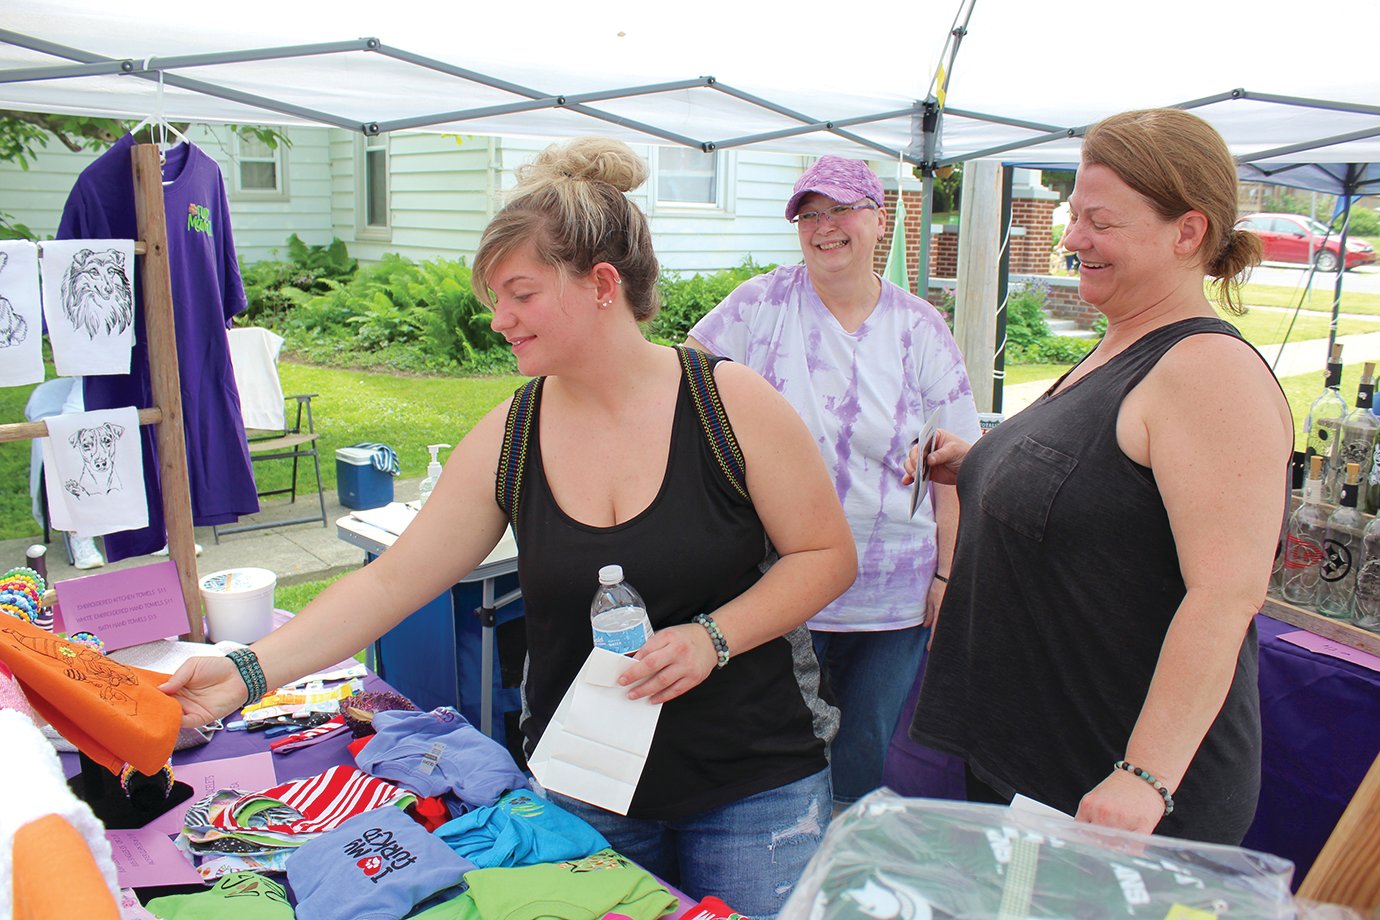 PurpleRoze owner and booth operator Ruby Rahm, center, assists Sheilah Price, left, and mother Eryn Price Saturday at the Waynetown Street Festival.